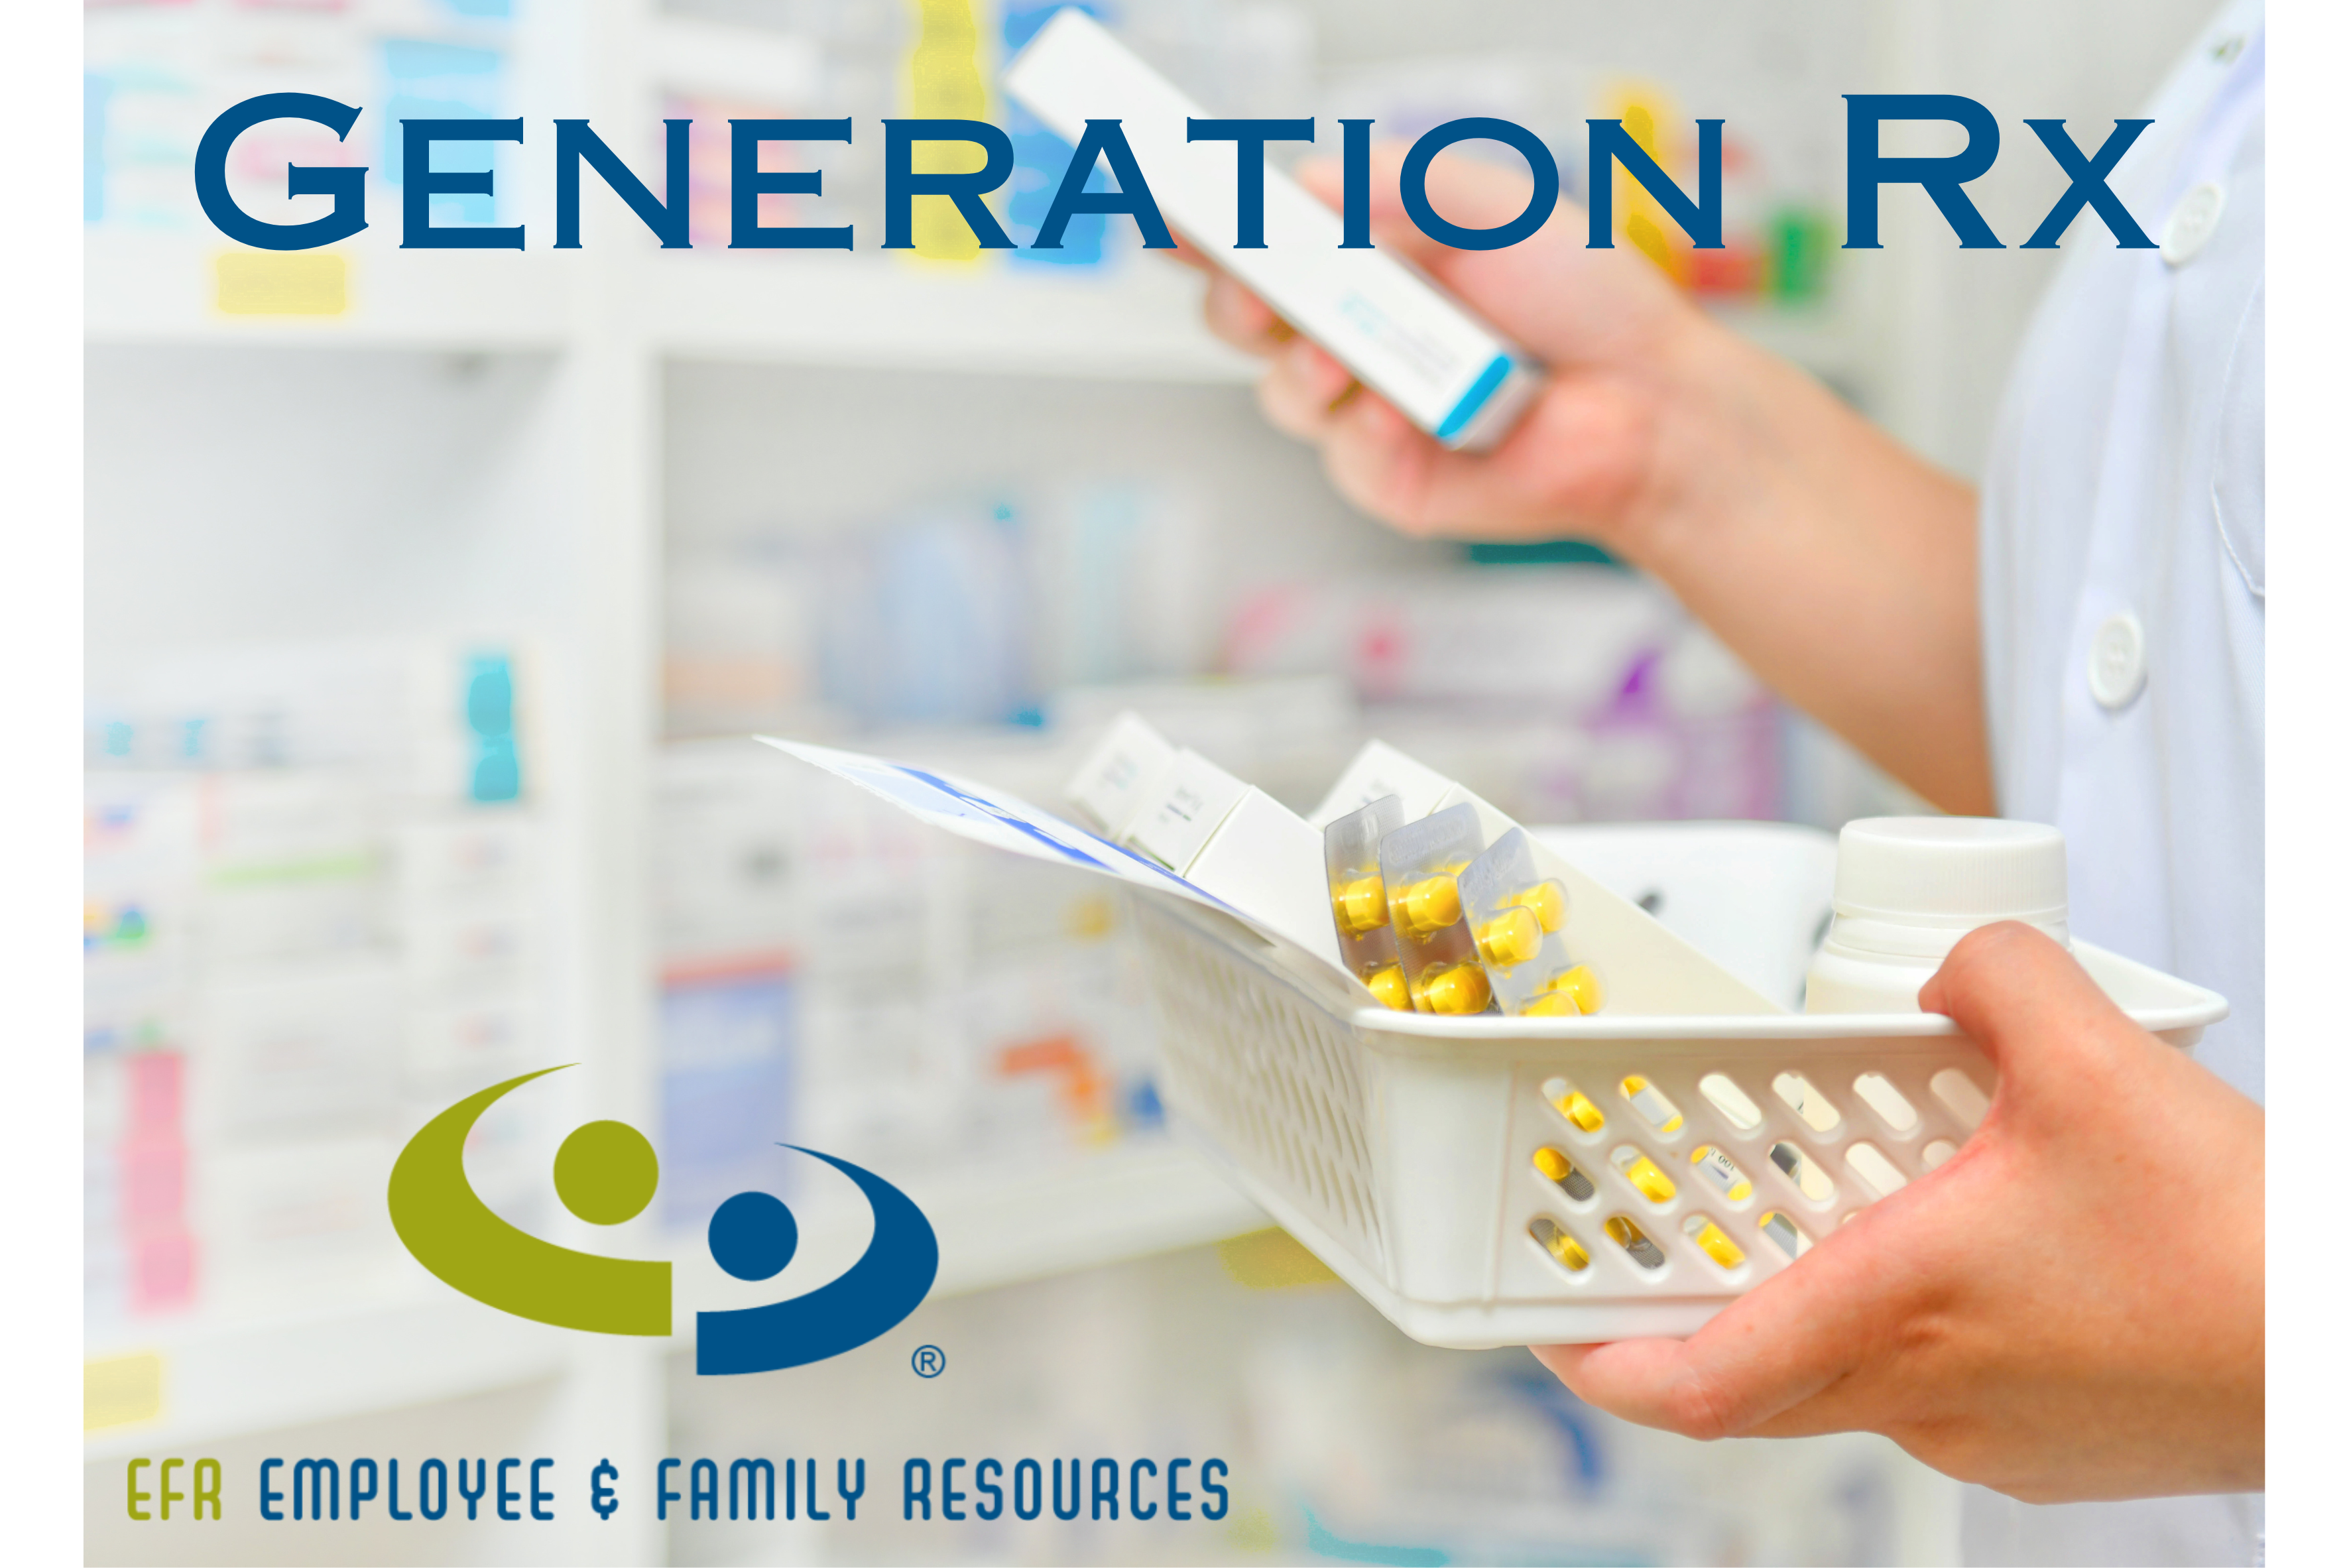 A picture of a person holding a container of prescription medicines with the words "Generation RX" and "EFR Employee and Family Resources" overlaid.